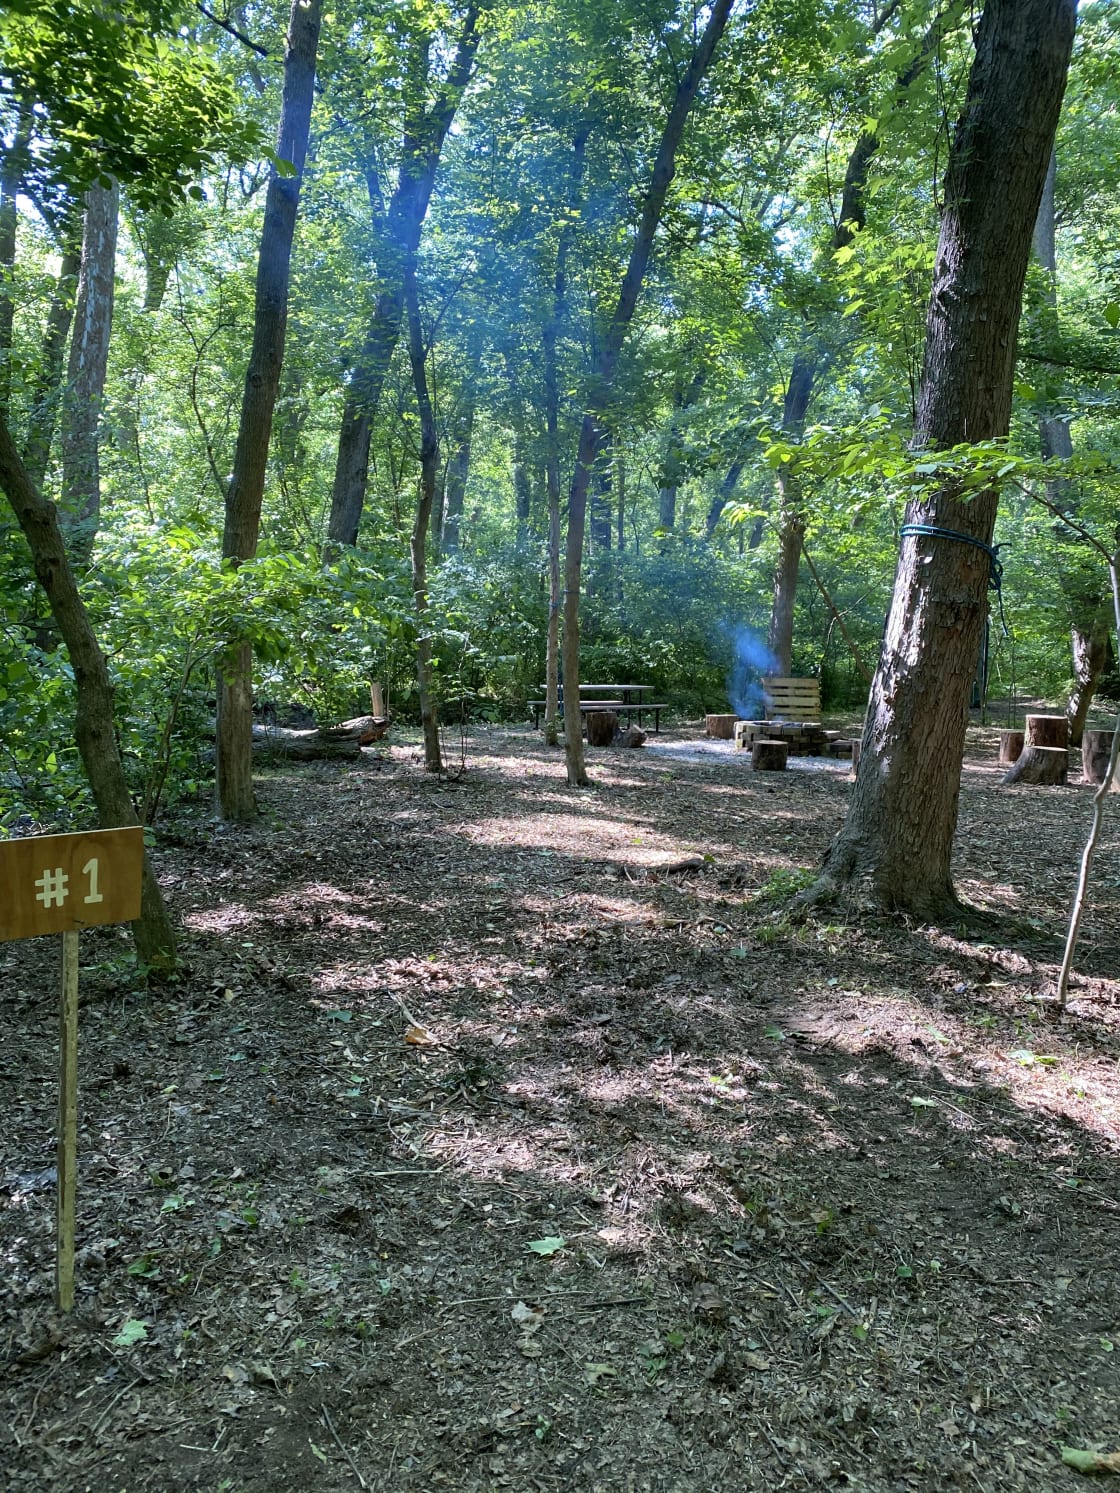 Entrance to site 